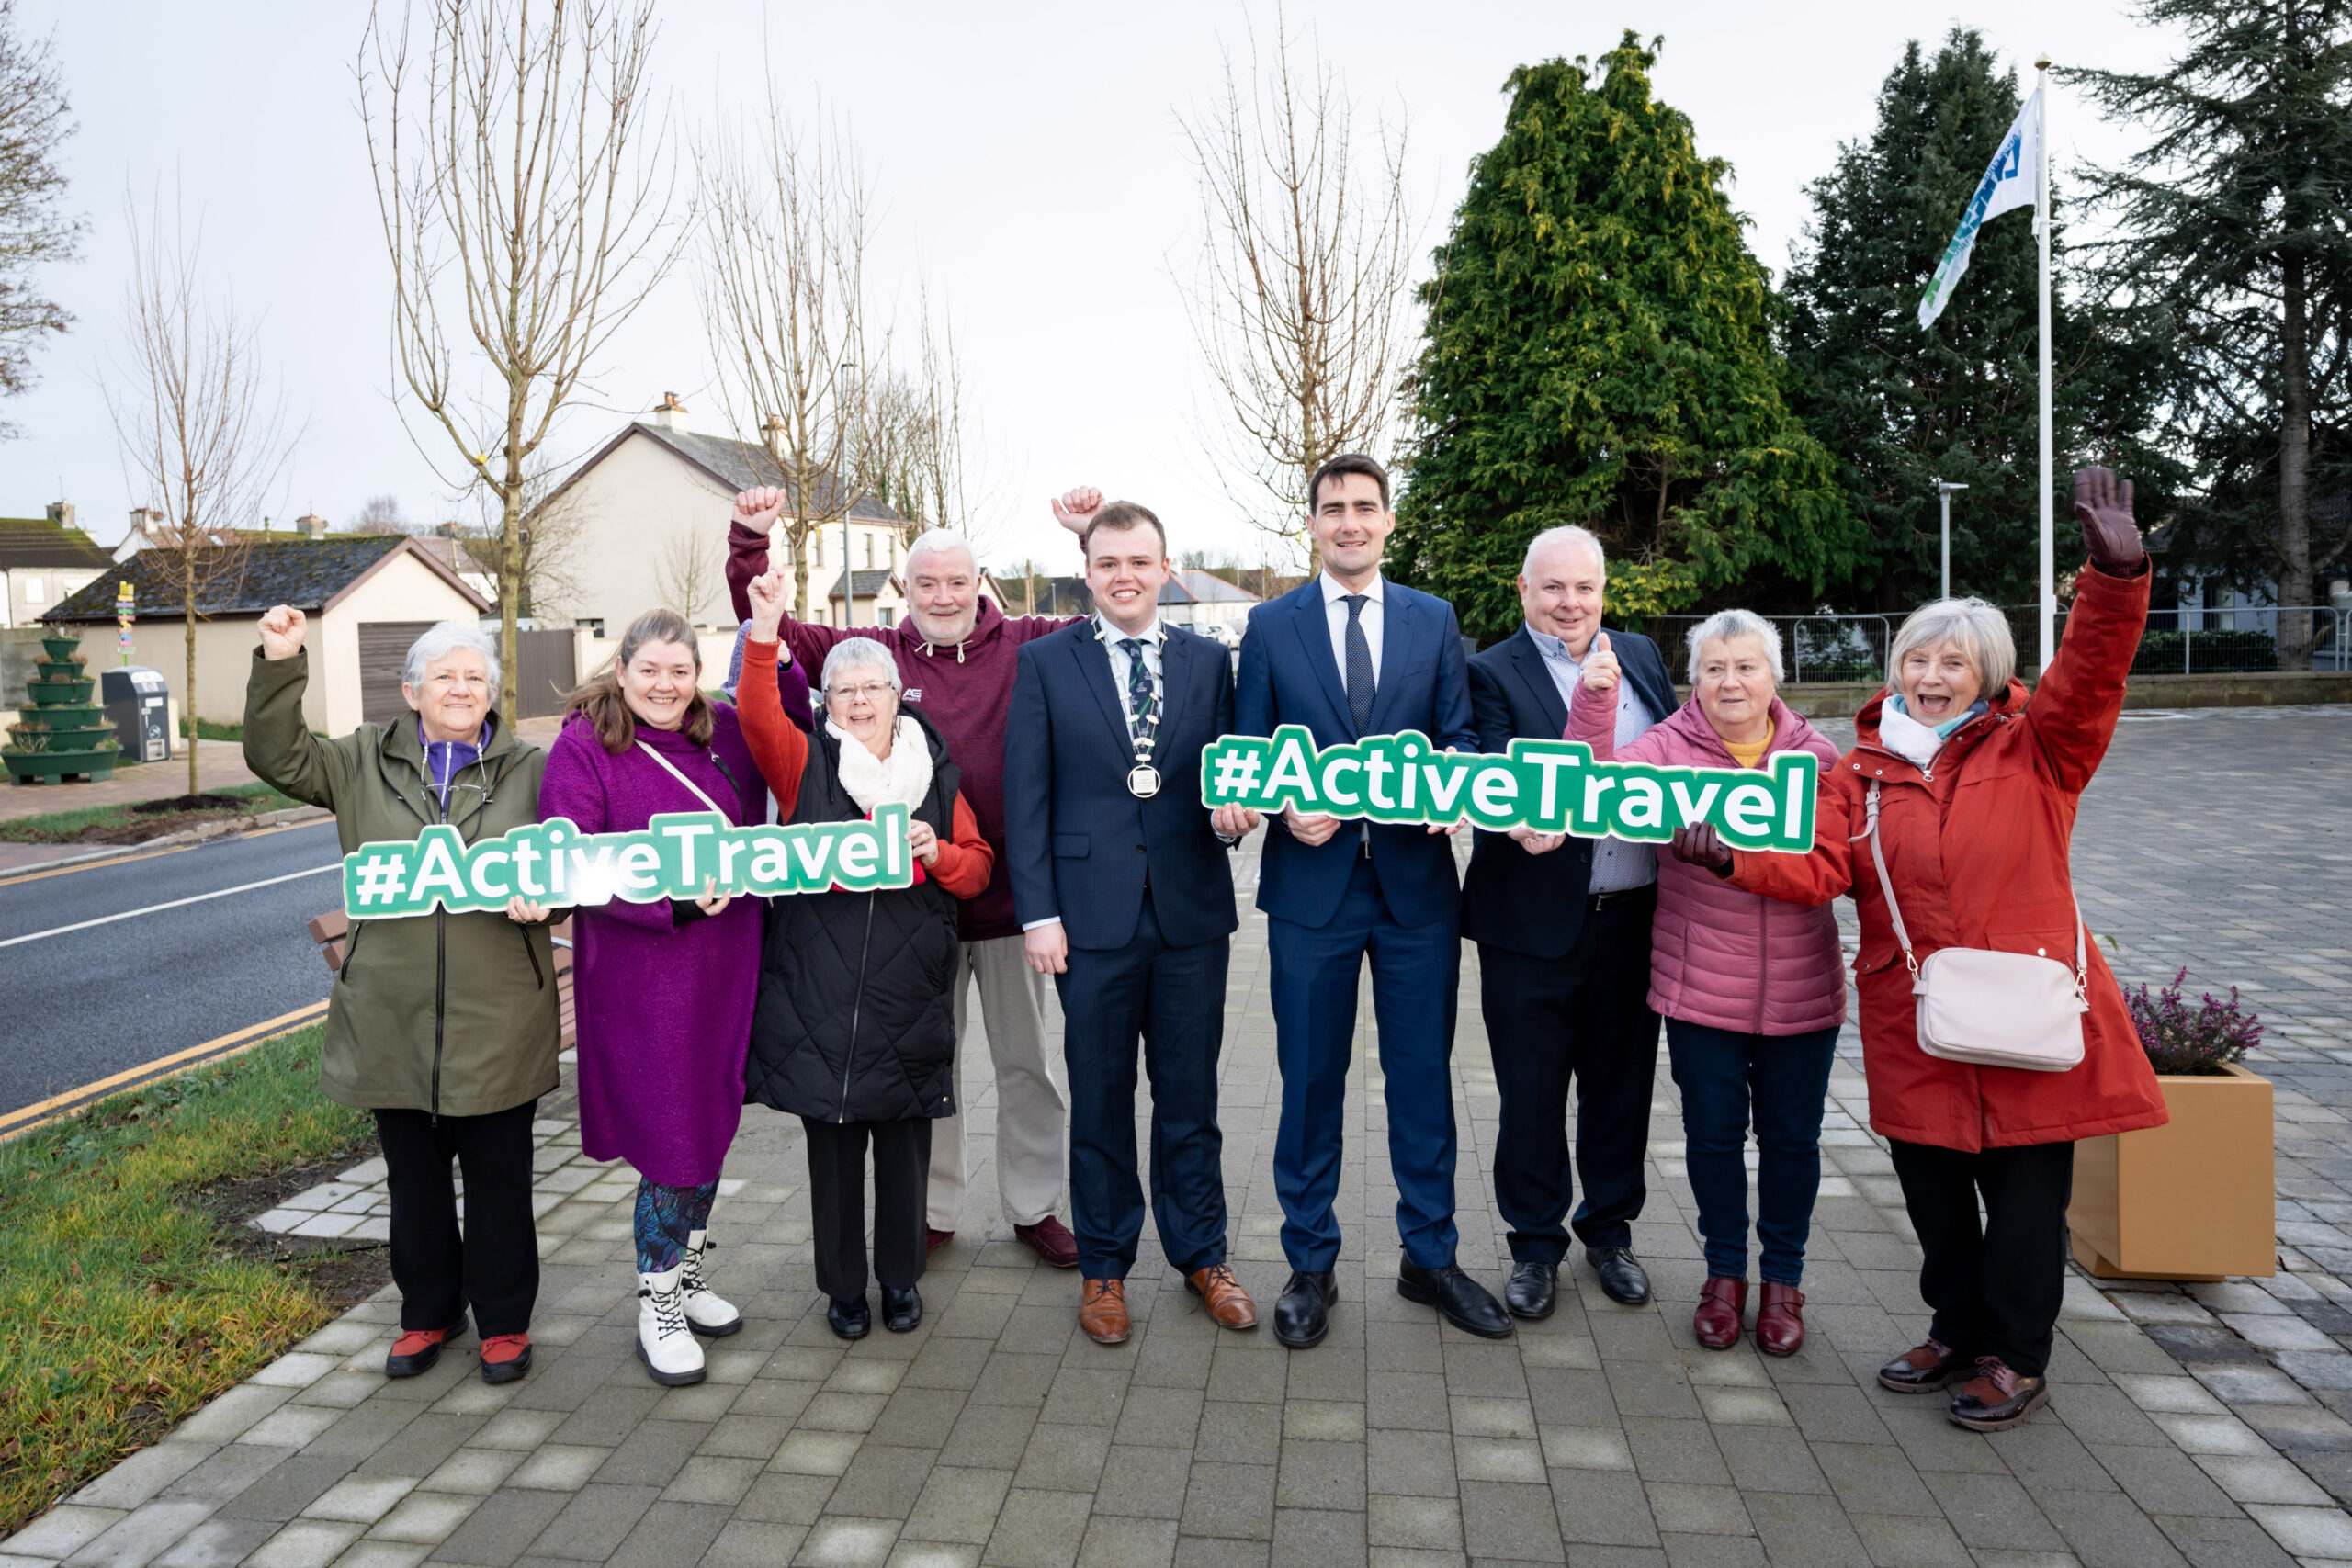 26/01/2024 Cllr Dan McSweeney, Deputy Mayor of Limerick City and County, and Jack Chambers TD, Minister of State at the Department of Transport and at the Department of Environment, Climate and Communications pictured with members of Patrickswell Tidy Towns Committee at the launch of the The Patrickswell Village Renewal Scheme, a project delivered by Limerick City & County Council. Phase 1 of this scheme was developed in 2017, with Phase 2 delivered by Active Travel Team through funding by the National Transport Authority (NTA) in 2023.   Pedestrians have been prioritised in the implementation of the scheme with controlled crossing points and improved sightlines for safety purposes.   Traffic calming features have also been provided, along with bus stops in the village centre, providing facilities to encourage a modal shift in the community.  Opportunities to link in with current developments in the village were optimised, including opening up a large plaza area in front of the Community Centre to extend out to the road edge, with seating and mature trees provided. Pic: Don Moloney